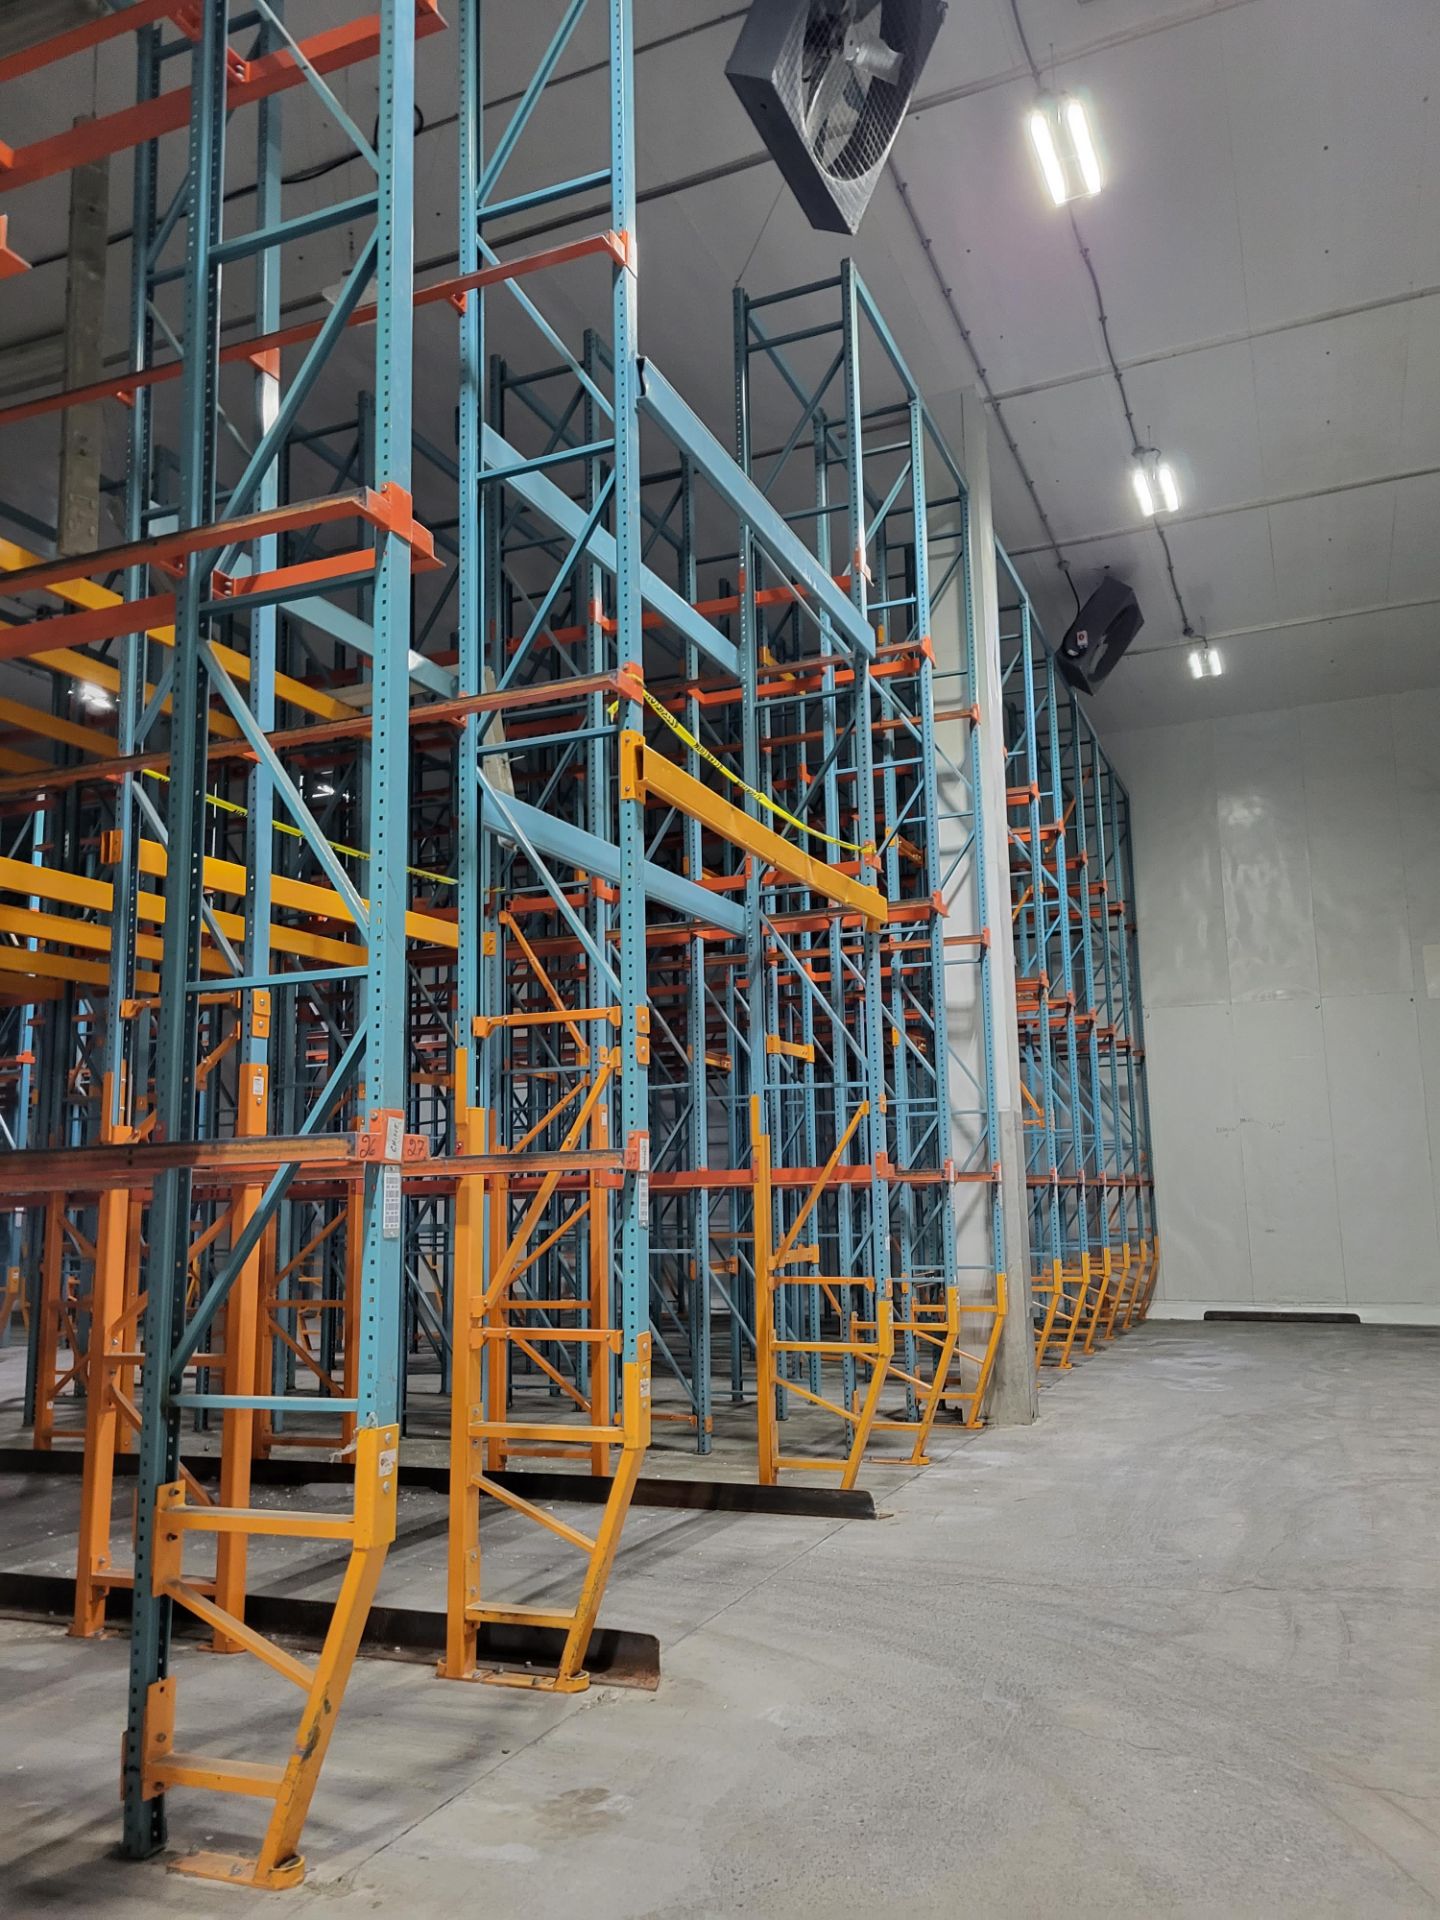 Drive Racking System 36 Rows/1500 Bays, (400) 22/25' Uprights (250) Rail Sections, (500+) Top Beams. - Image 3 of 14